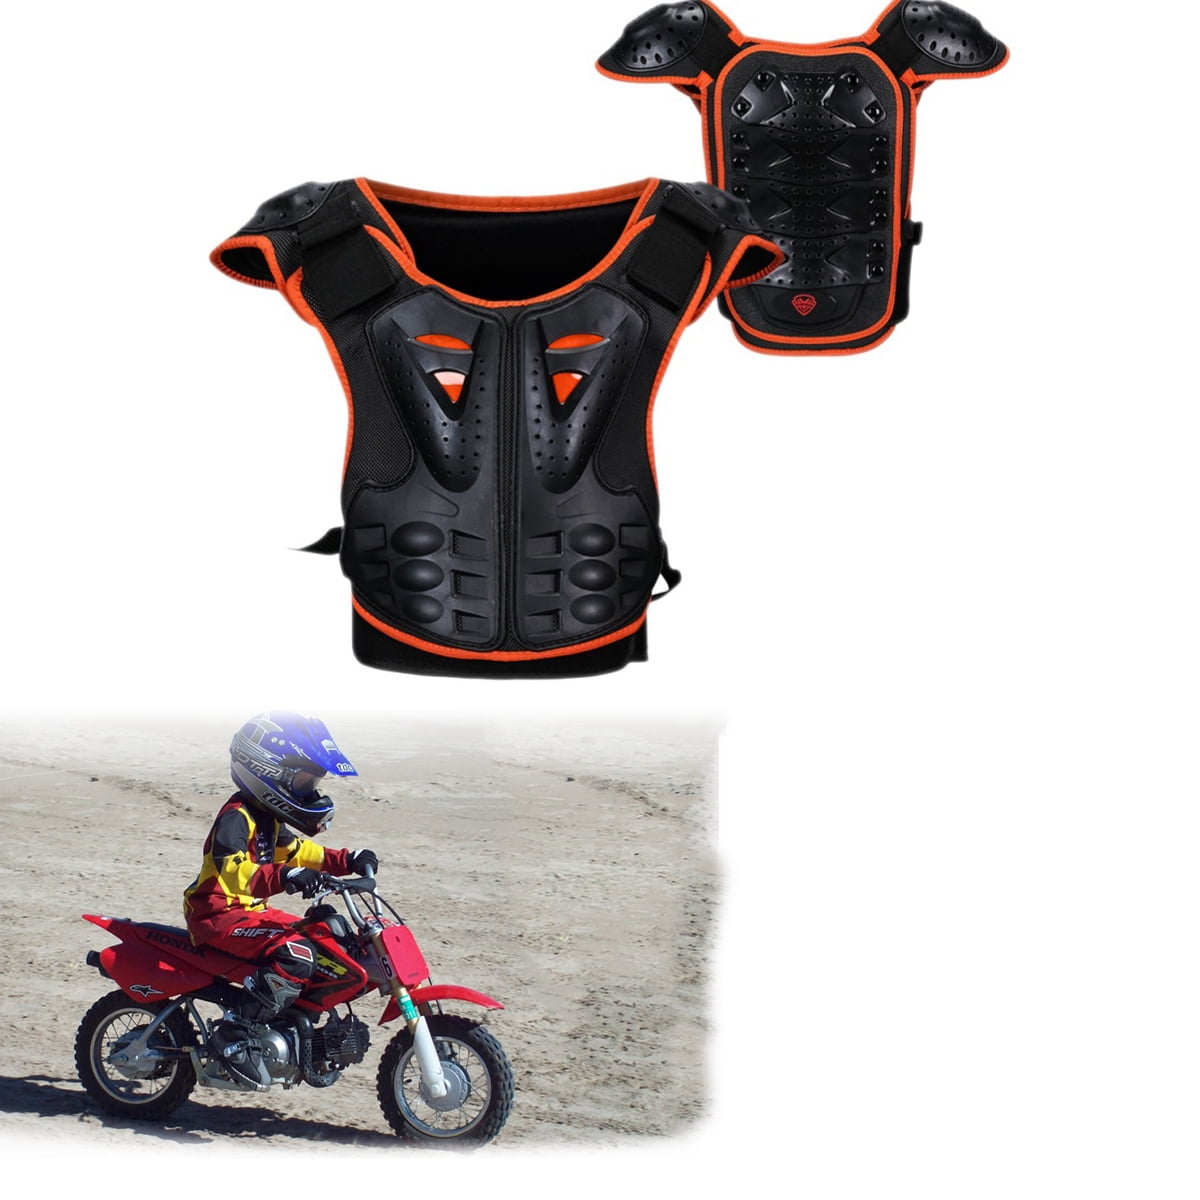 Kids,Cub Body Armour Motorcycle Motorbike Motocross spine Protector Guard Jacket 